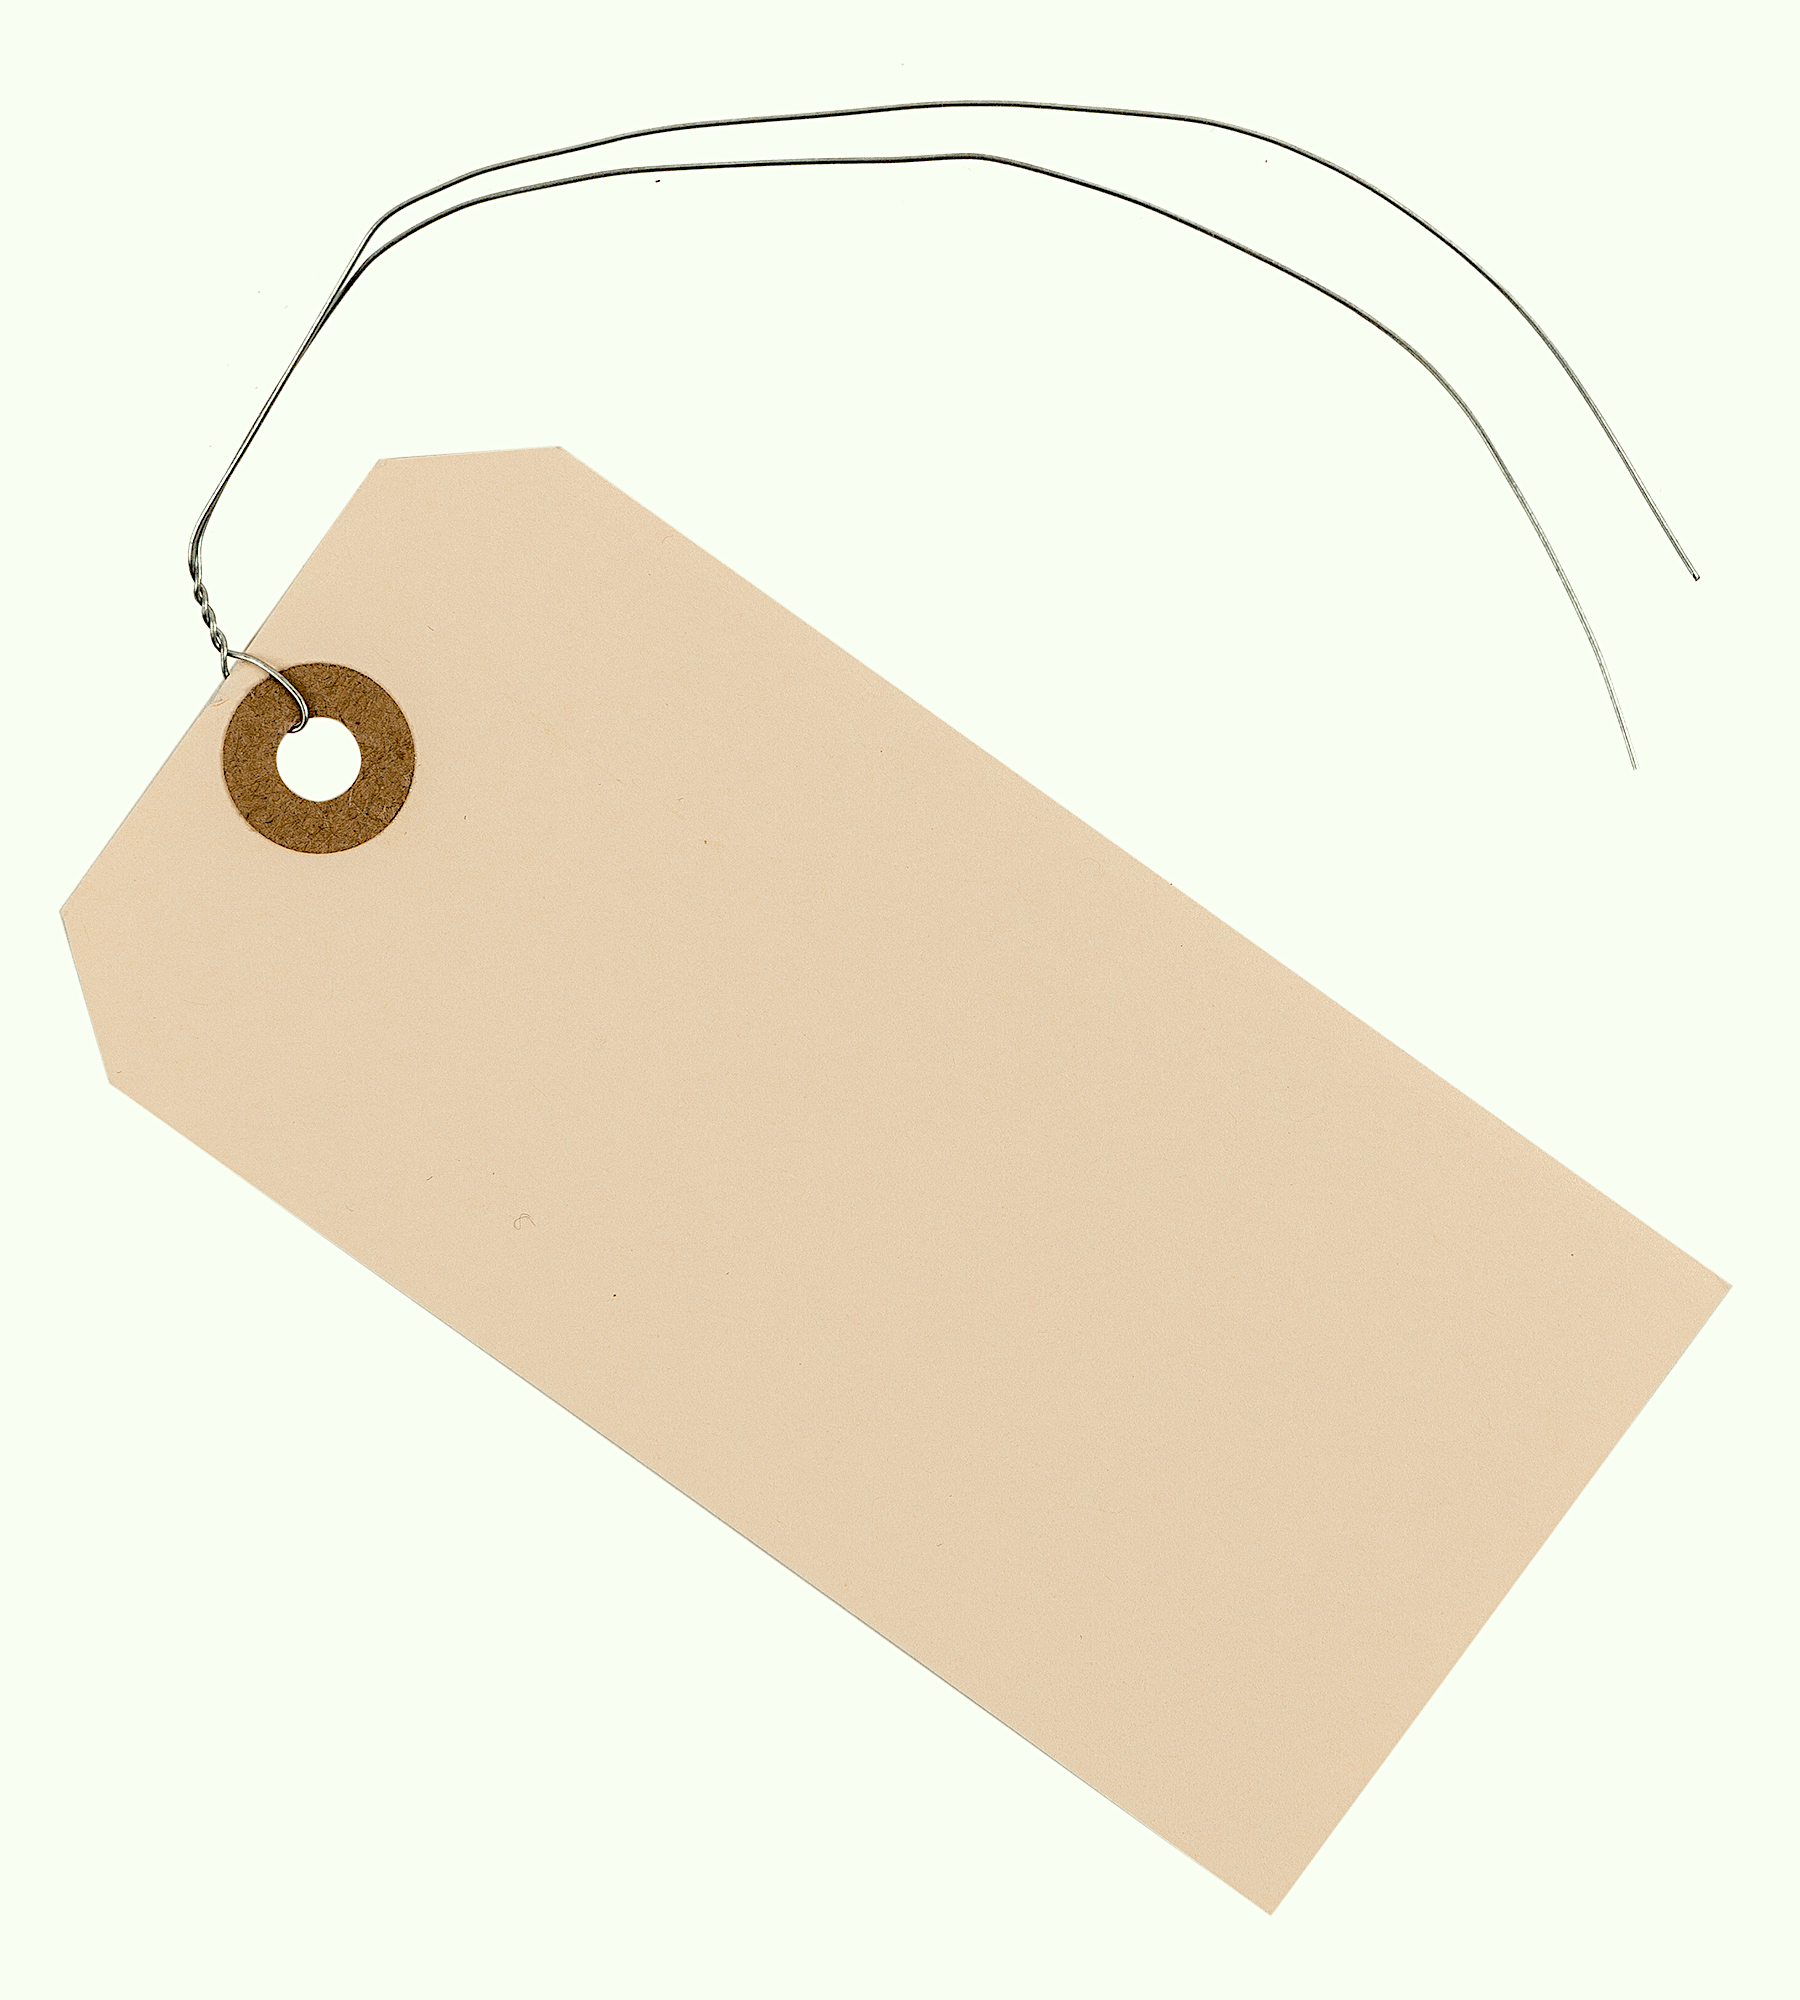 Tags with Elastic String Attached - #5, 4 3/4 x 2 3/8 Box of 100 Manila  Paper Label Tags with Elastic Loop and Reinforced Hole